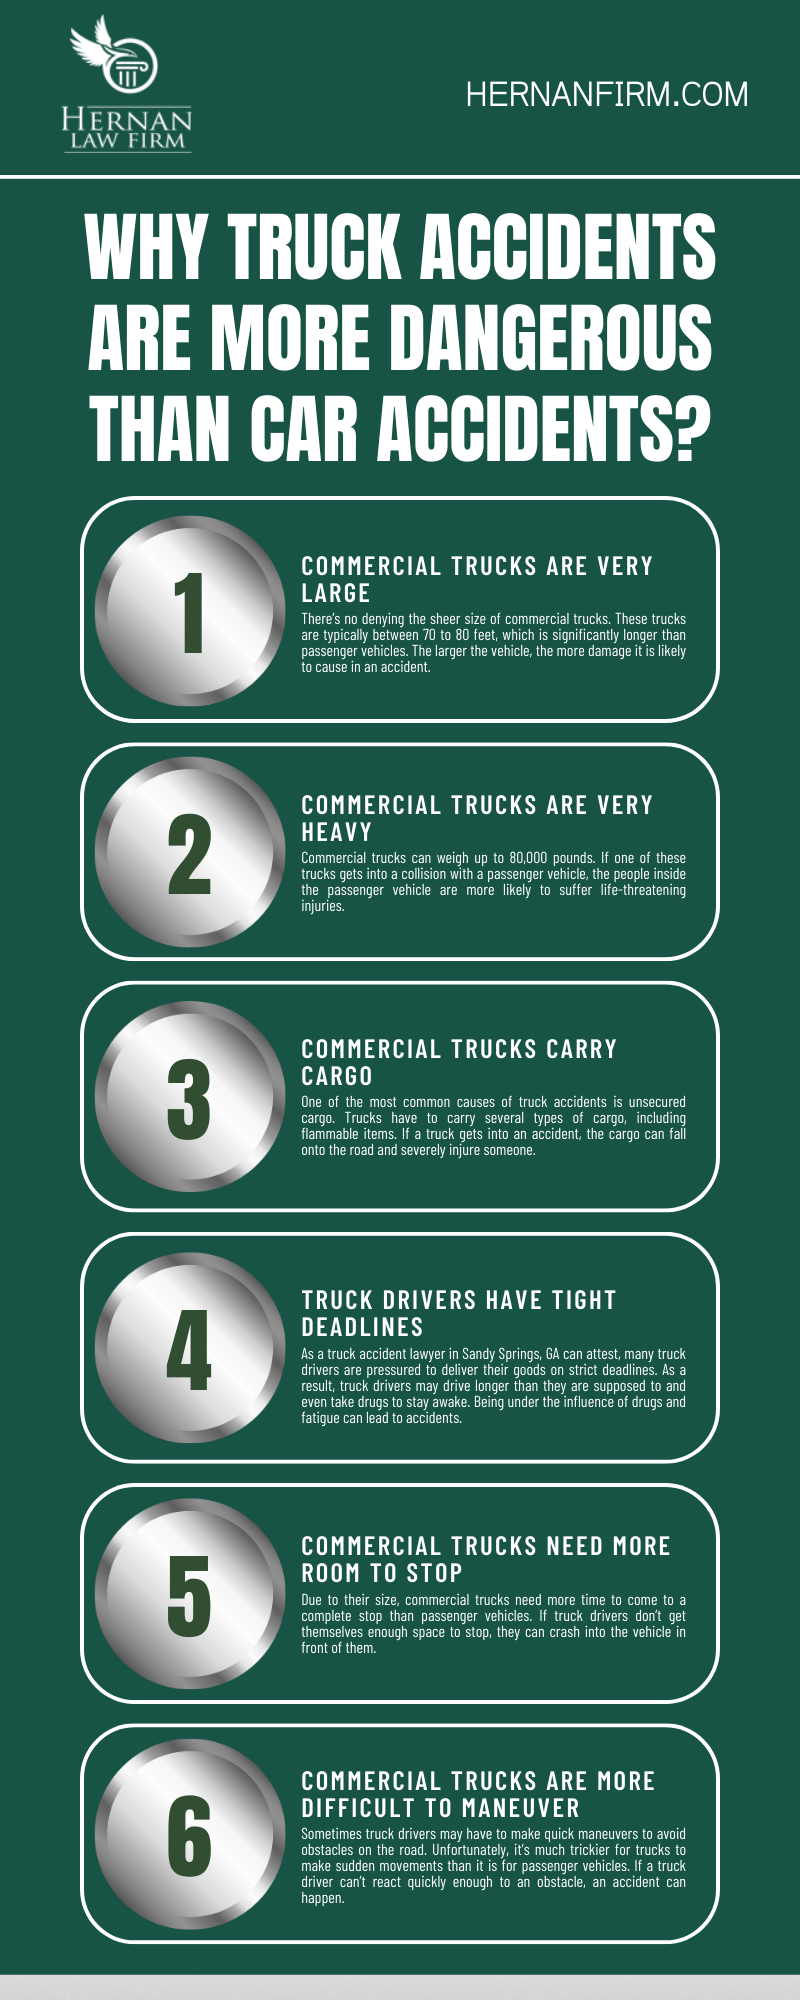 WHY TRUCK ACCIDENTS ARE MORE DANGEROUS THAN CAR ACCIDENTS INFOGRAPHIC